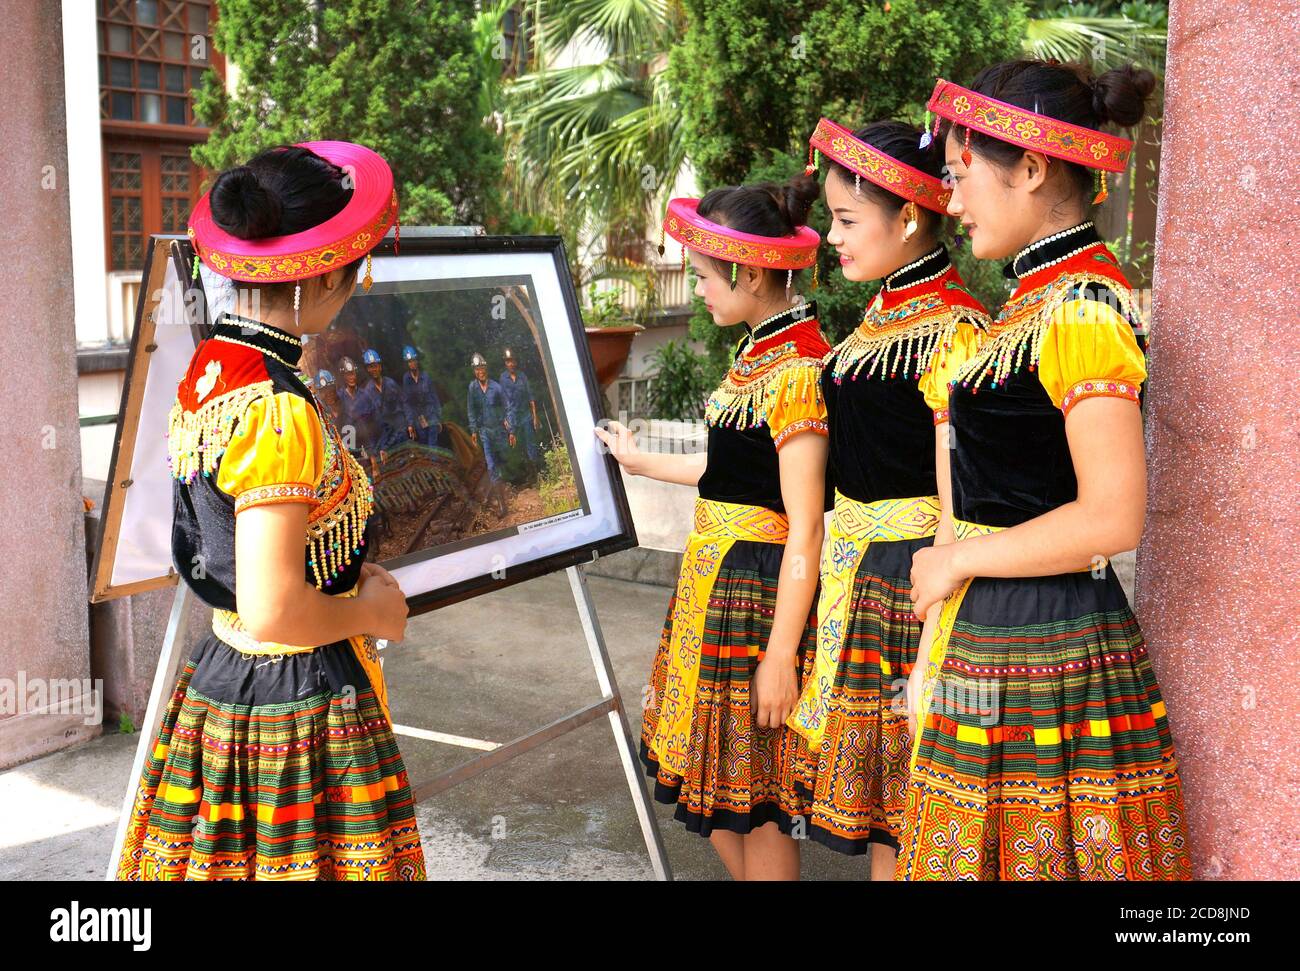 A group of Hmong ethnic women watching an outdoor photo exhibition, Thai Nguyen, Vietnam. Stock Photo